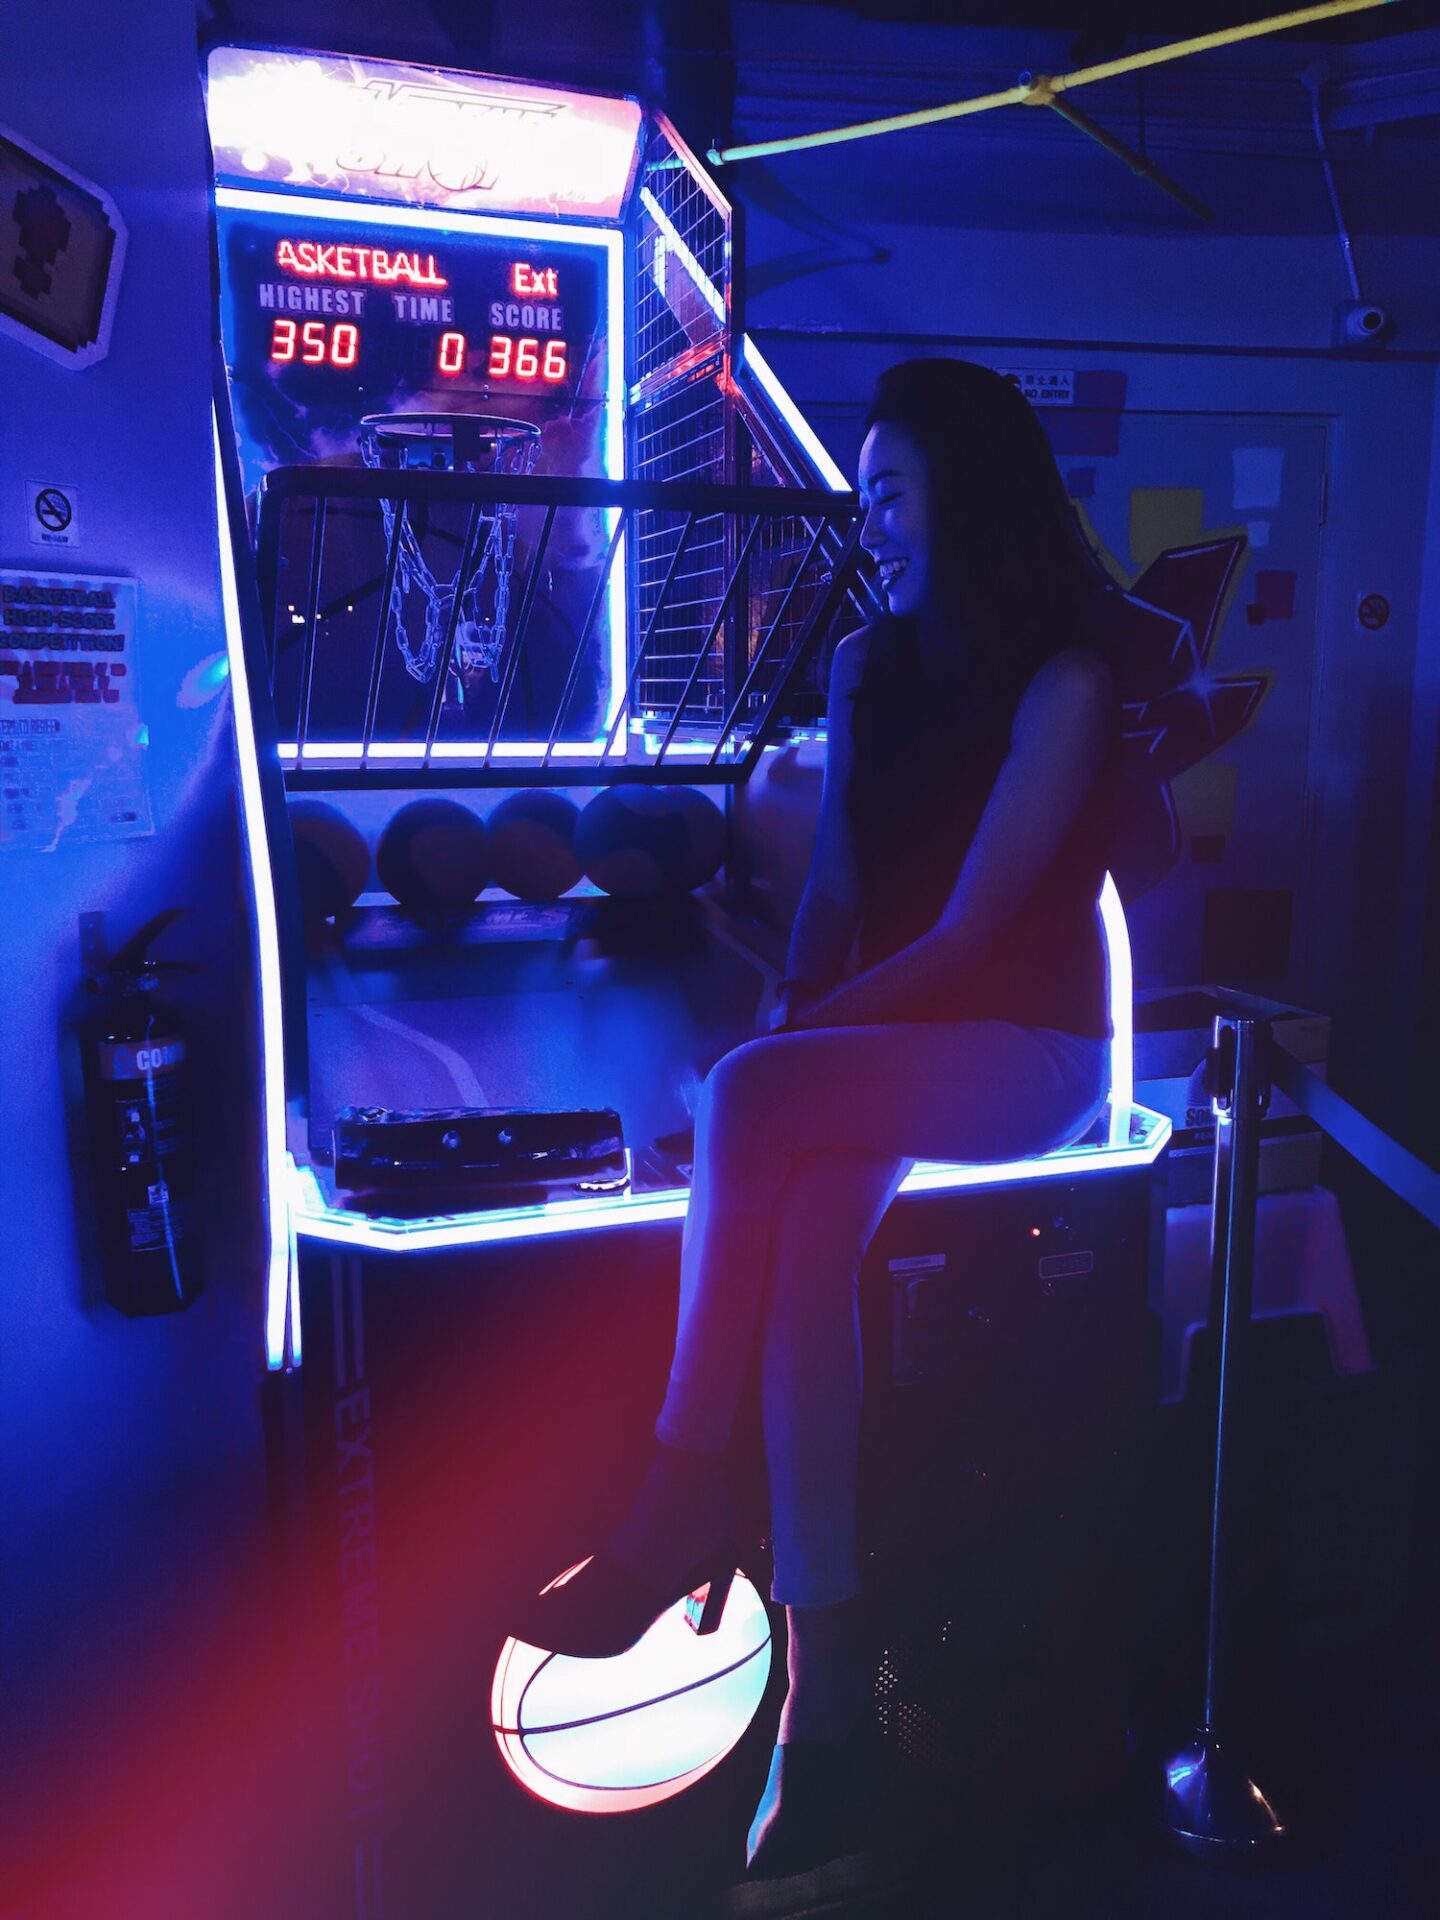 Woman sitting at the hoops machine in the arcade.